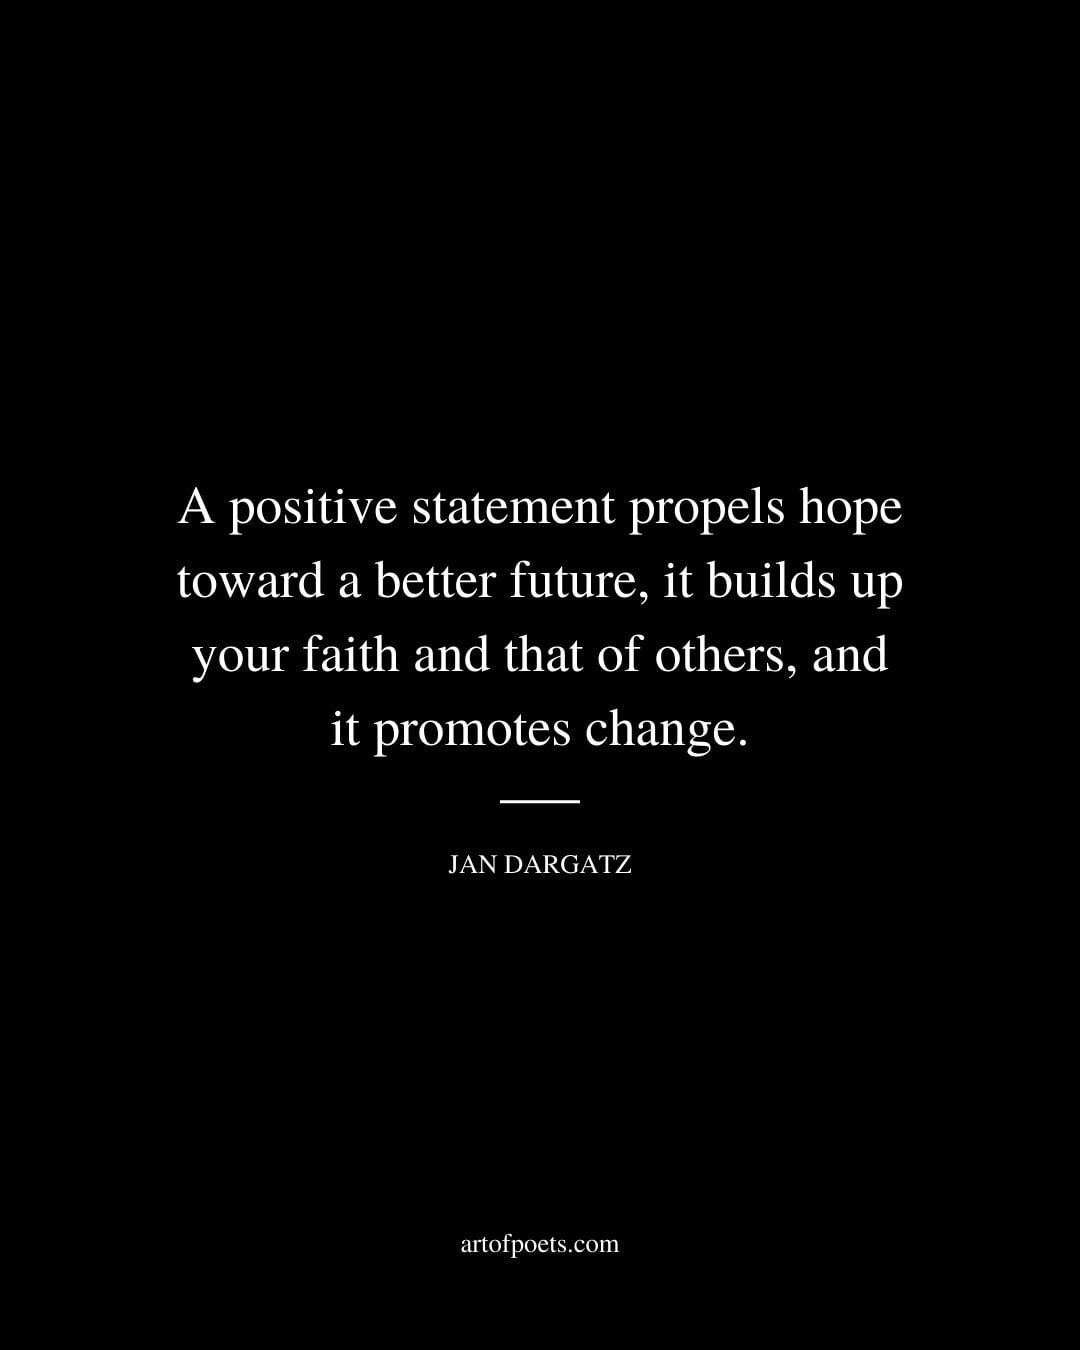 A positive statement propels hope toward a better future it builds up your faith and that of others and it promotes change. Jan Dargatz